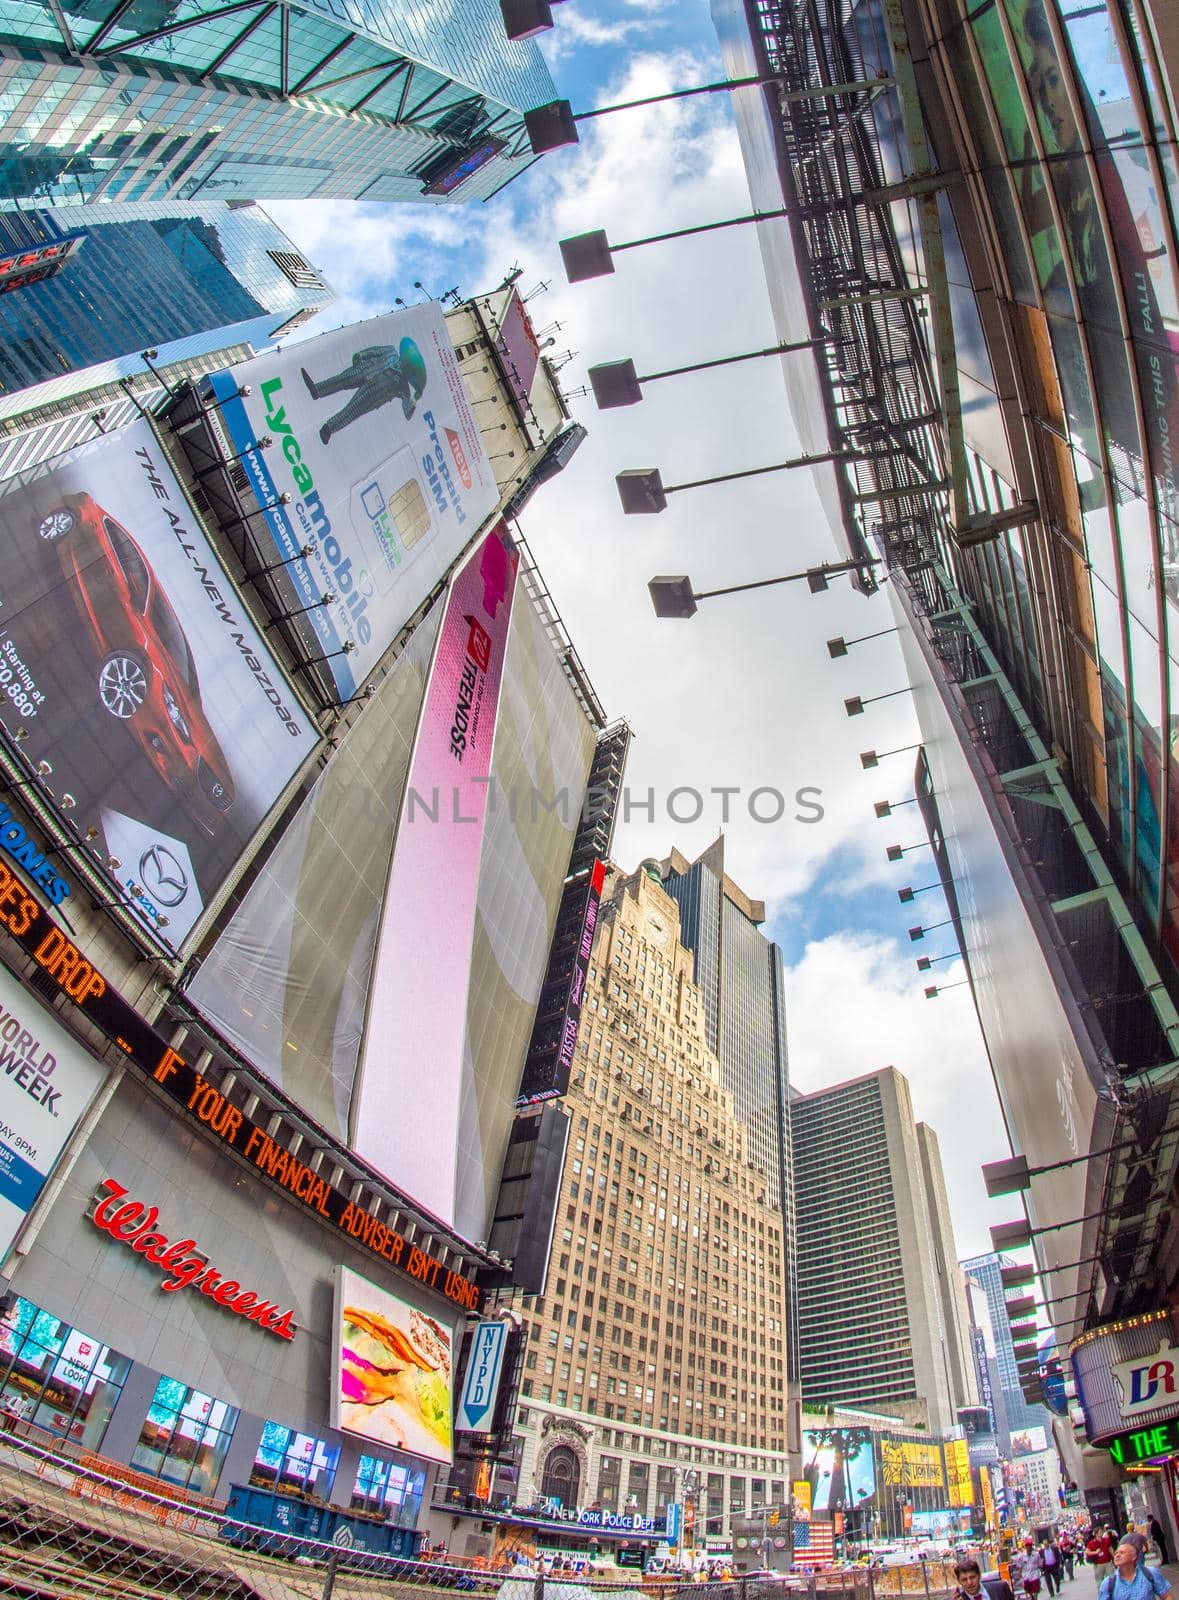 NEW YORK CITY - JUNE 11, 2013: Tourists crowded in Times Square, famous tourist attraction by jovannig